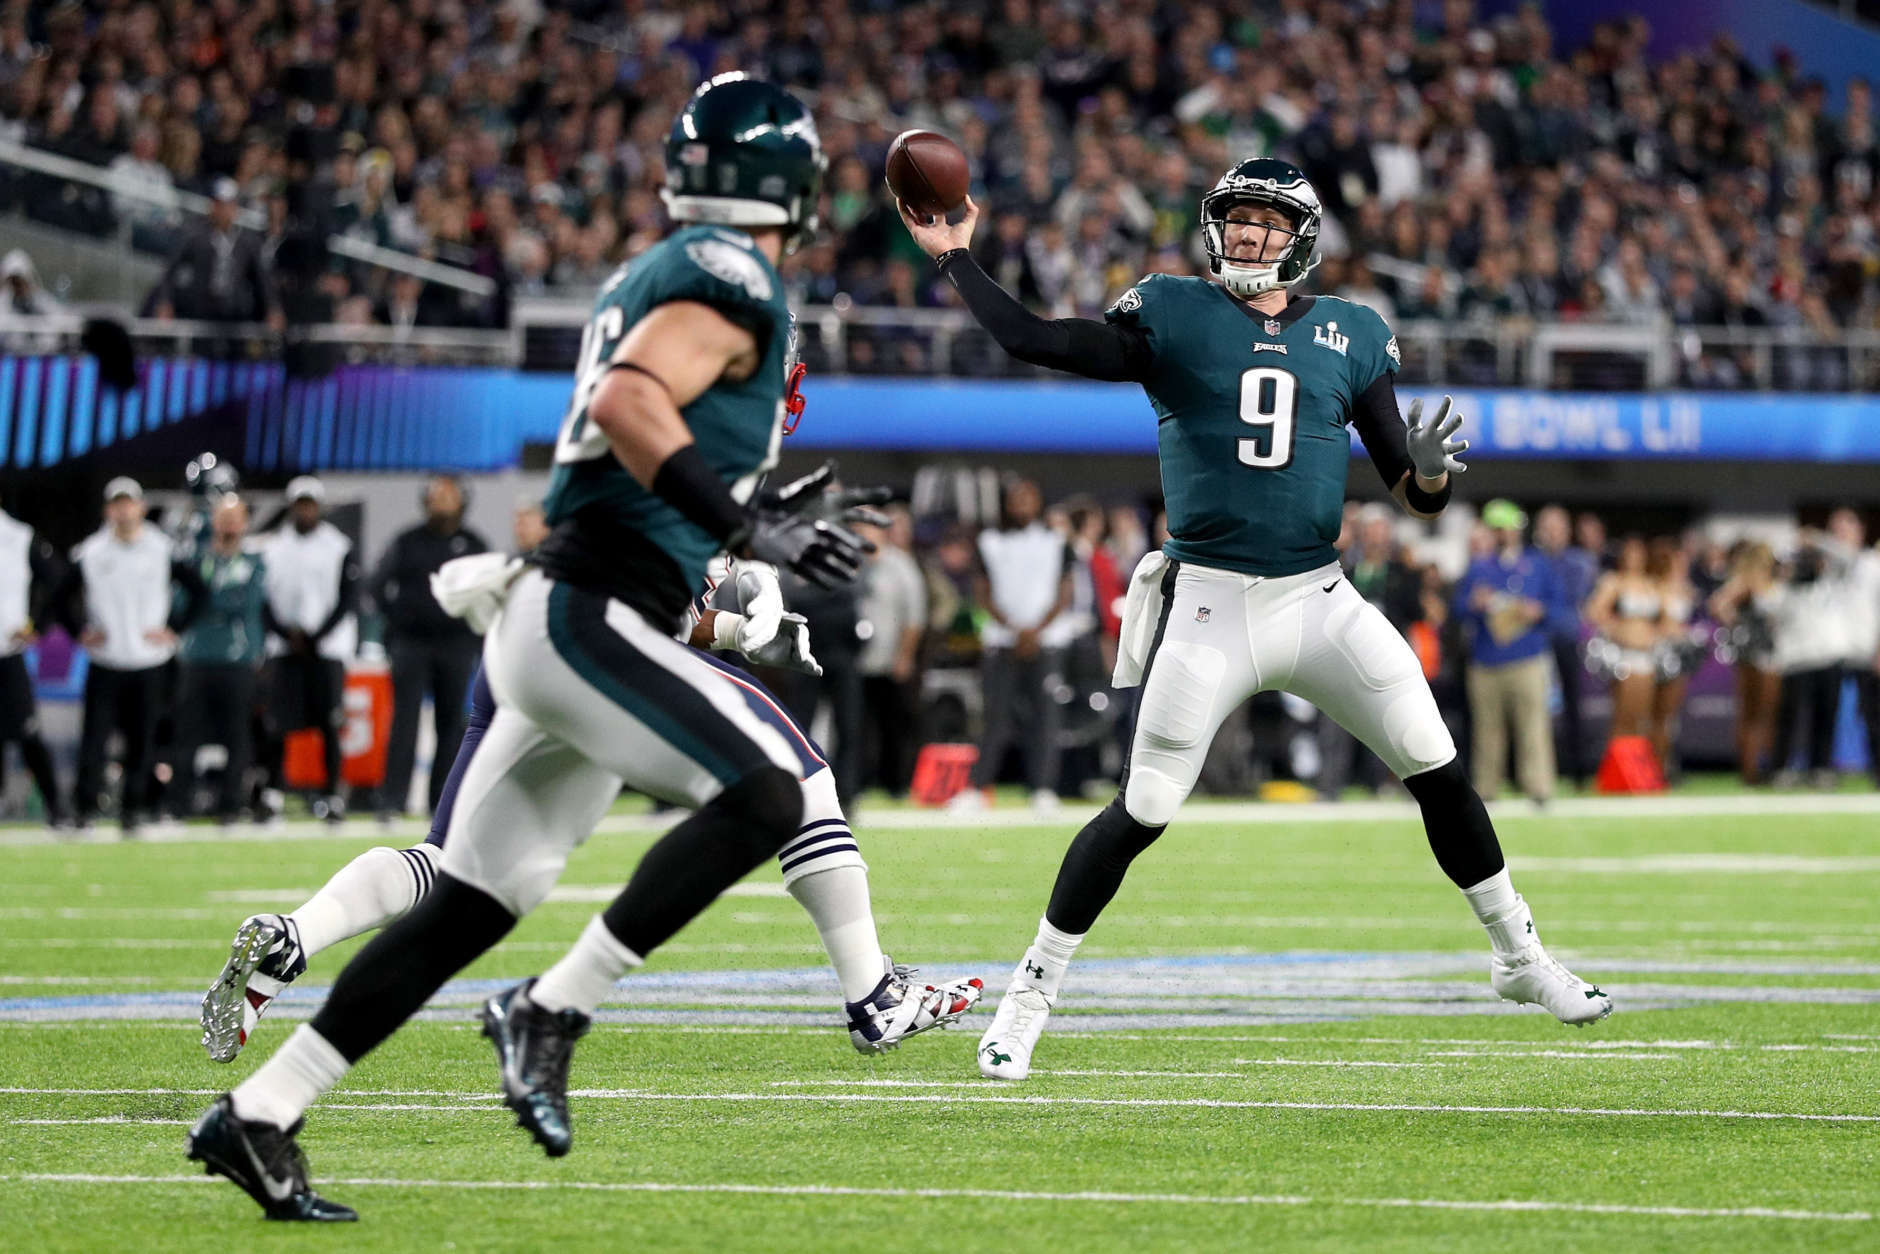 MINNEAPOLIS, MN - FEBRUARY 04:  Nick Foles #9 of the Philadelphia Eagles throws a pass against the New England Patriots during the first quarter in Super Bowl LII at U.S. Bank Stadium on February 4, 2018 in Minneapolis, Minnesota.  (Photo by Patrick Smith/Getty Images)